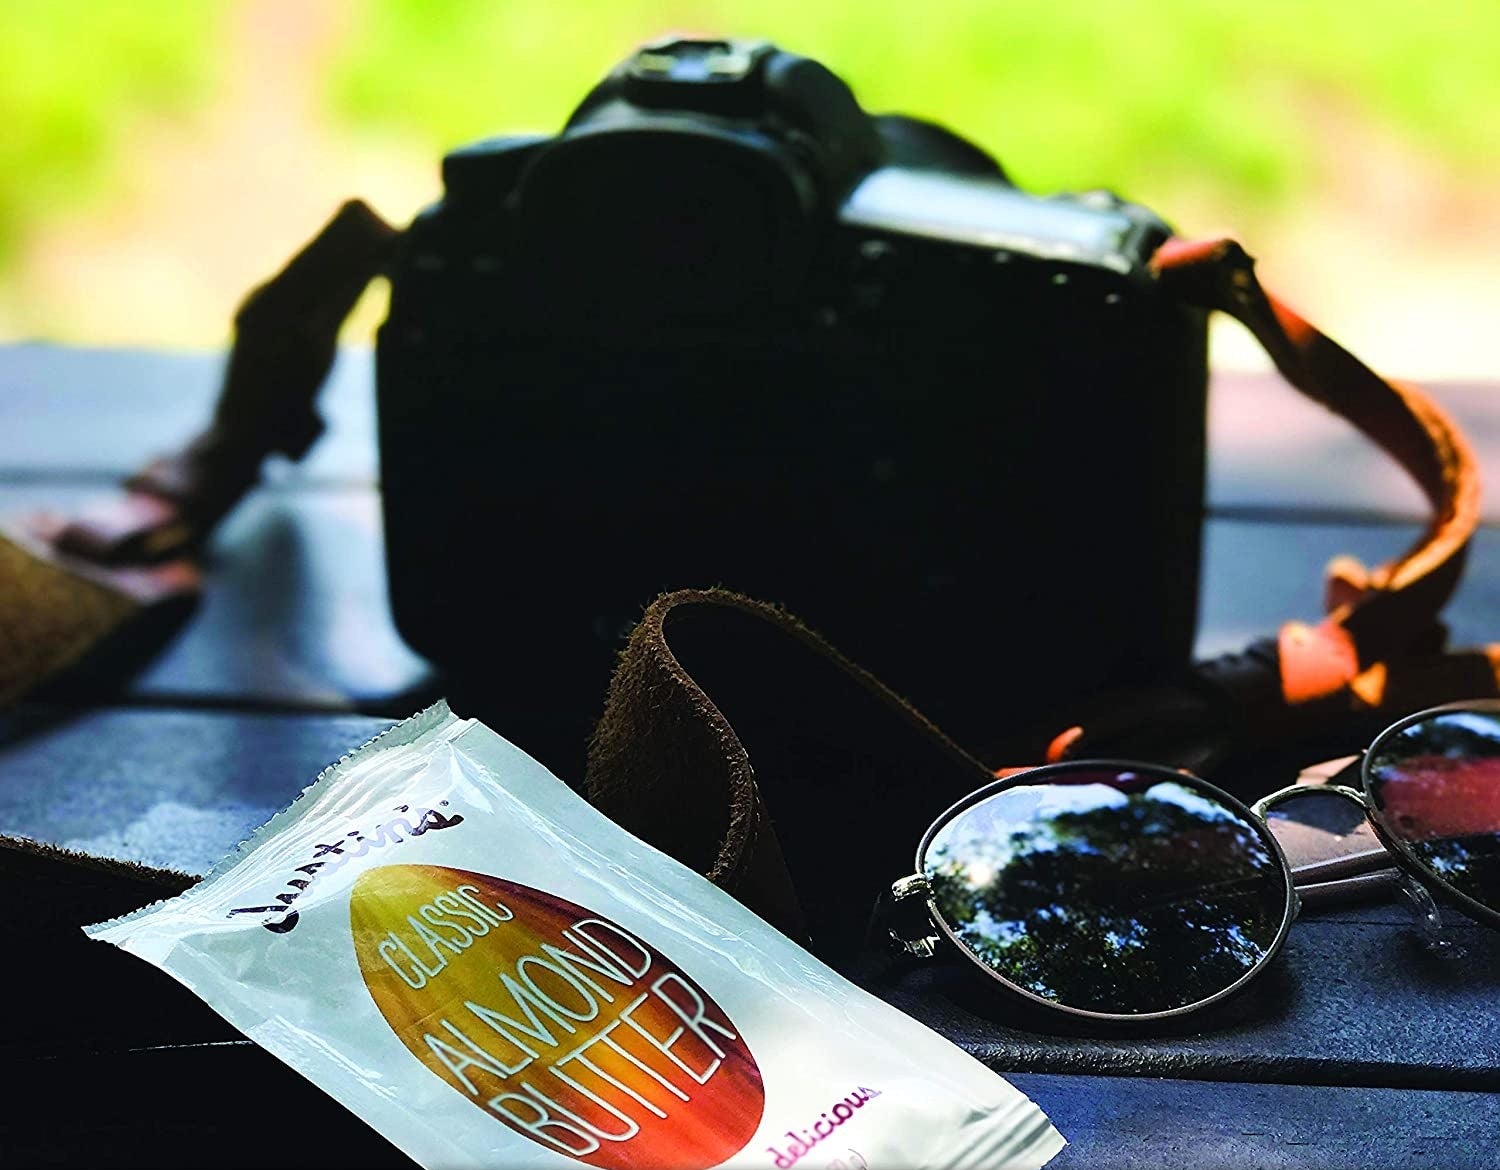 Packet of almond butter propped against a digital camera and next to a pair of sunglasses. All three objects rest on a blue picnic table. Product infographics display 6g protein, Orangutan friendly palm oil, Non-GMO verified, GF, and U